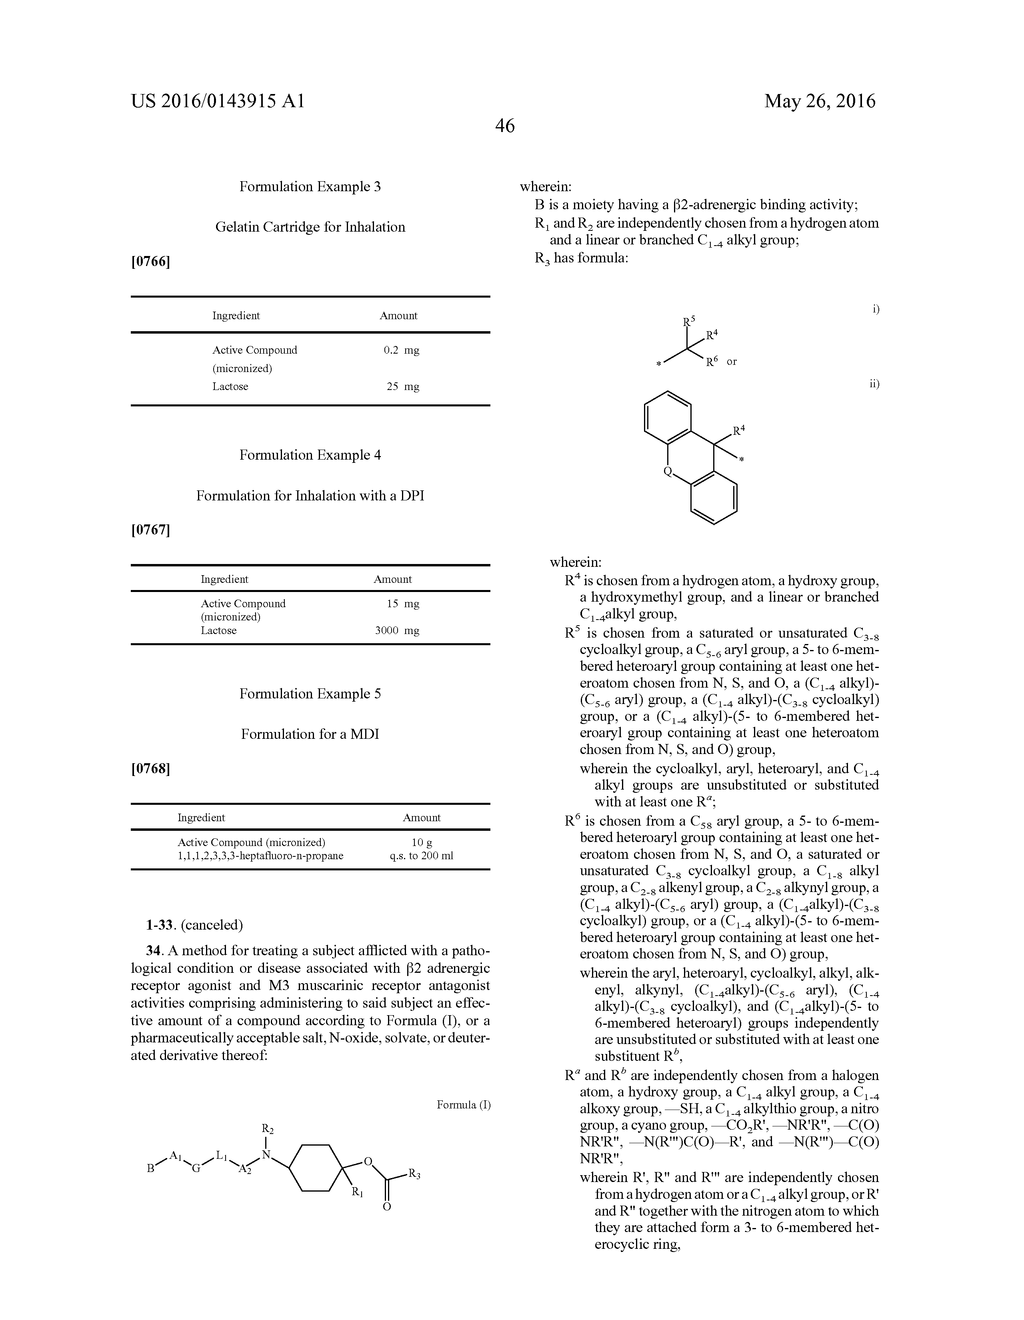 NEW CYCLOHEXYLAMINE DERIVATIVES HAVING  2 ADRENERGIC AGONIST AND M3     MUSCARINIC ANTAGONIST ACTIVITIES - diagram, schematic, and image 47